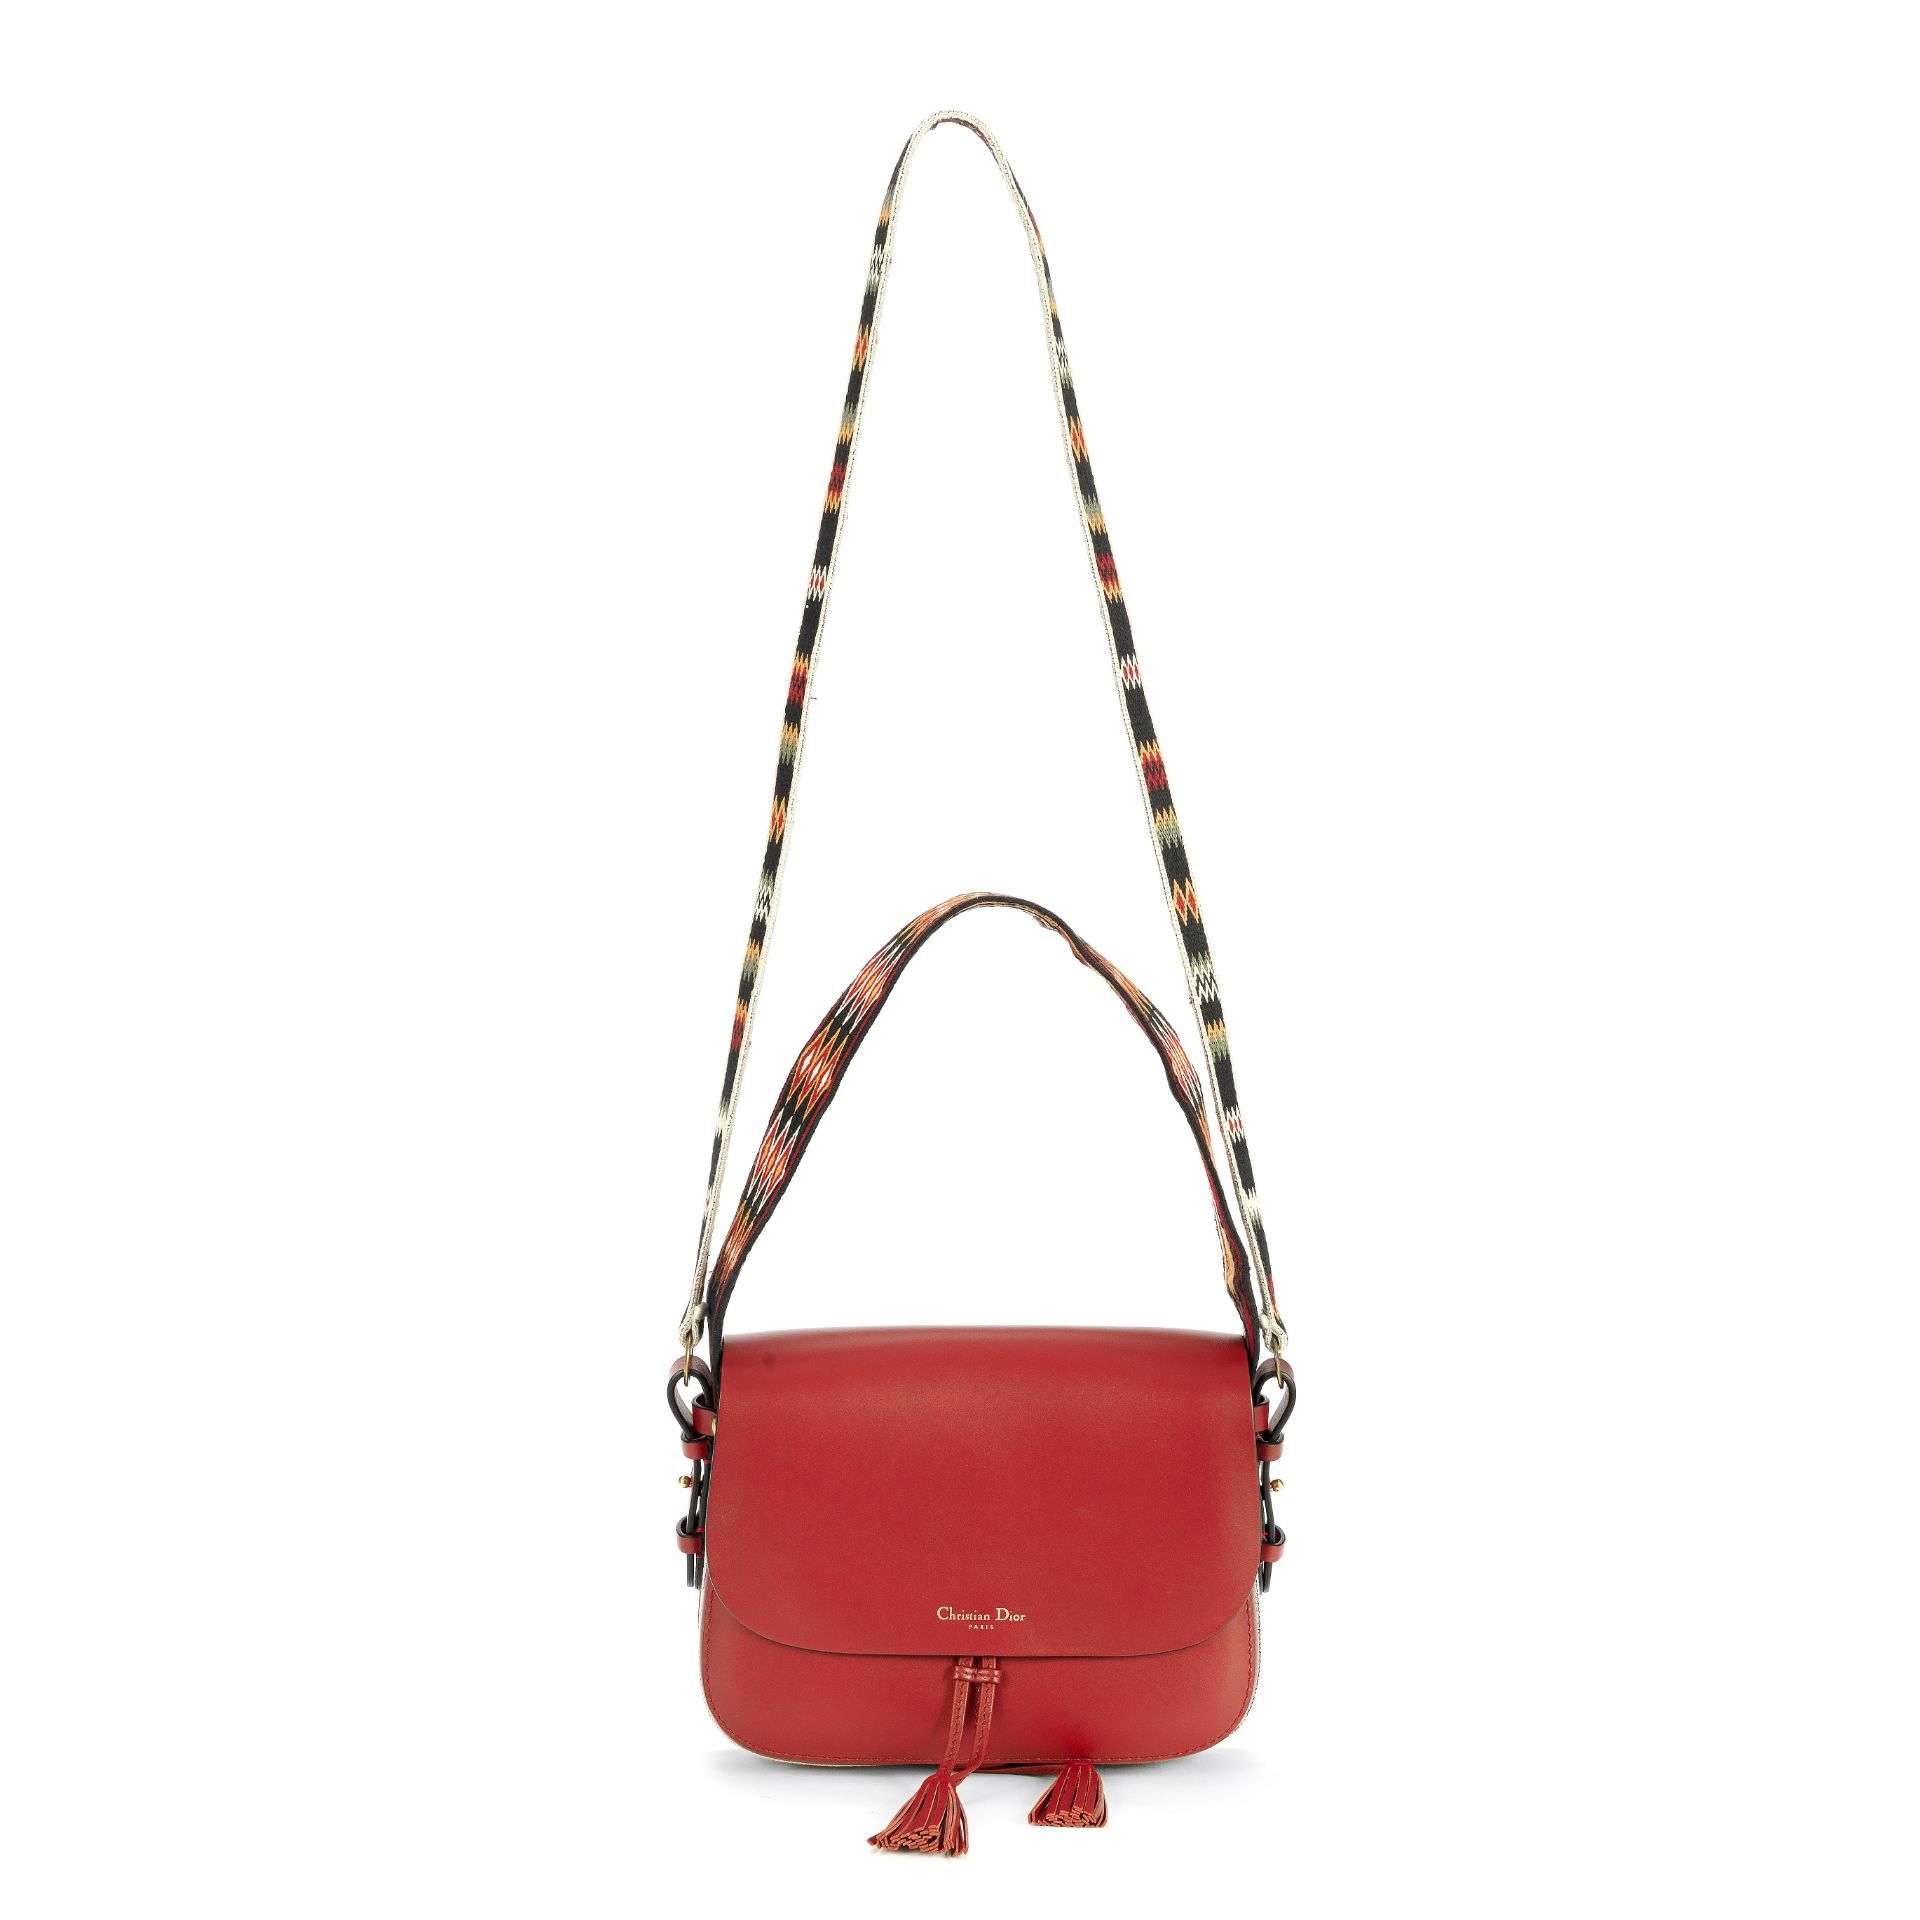 Red DiorOdeo Shoulder Bag, Christian Dior, c. 2018, (Includes authenticity card, dust bag and box)